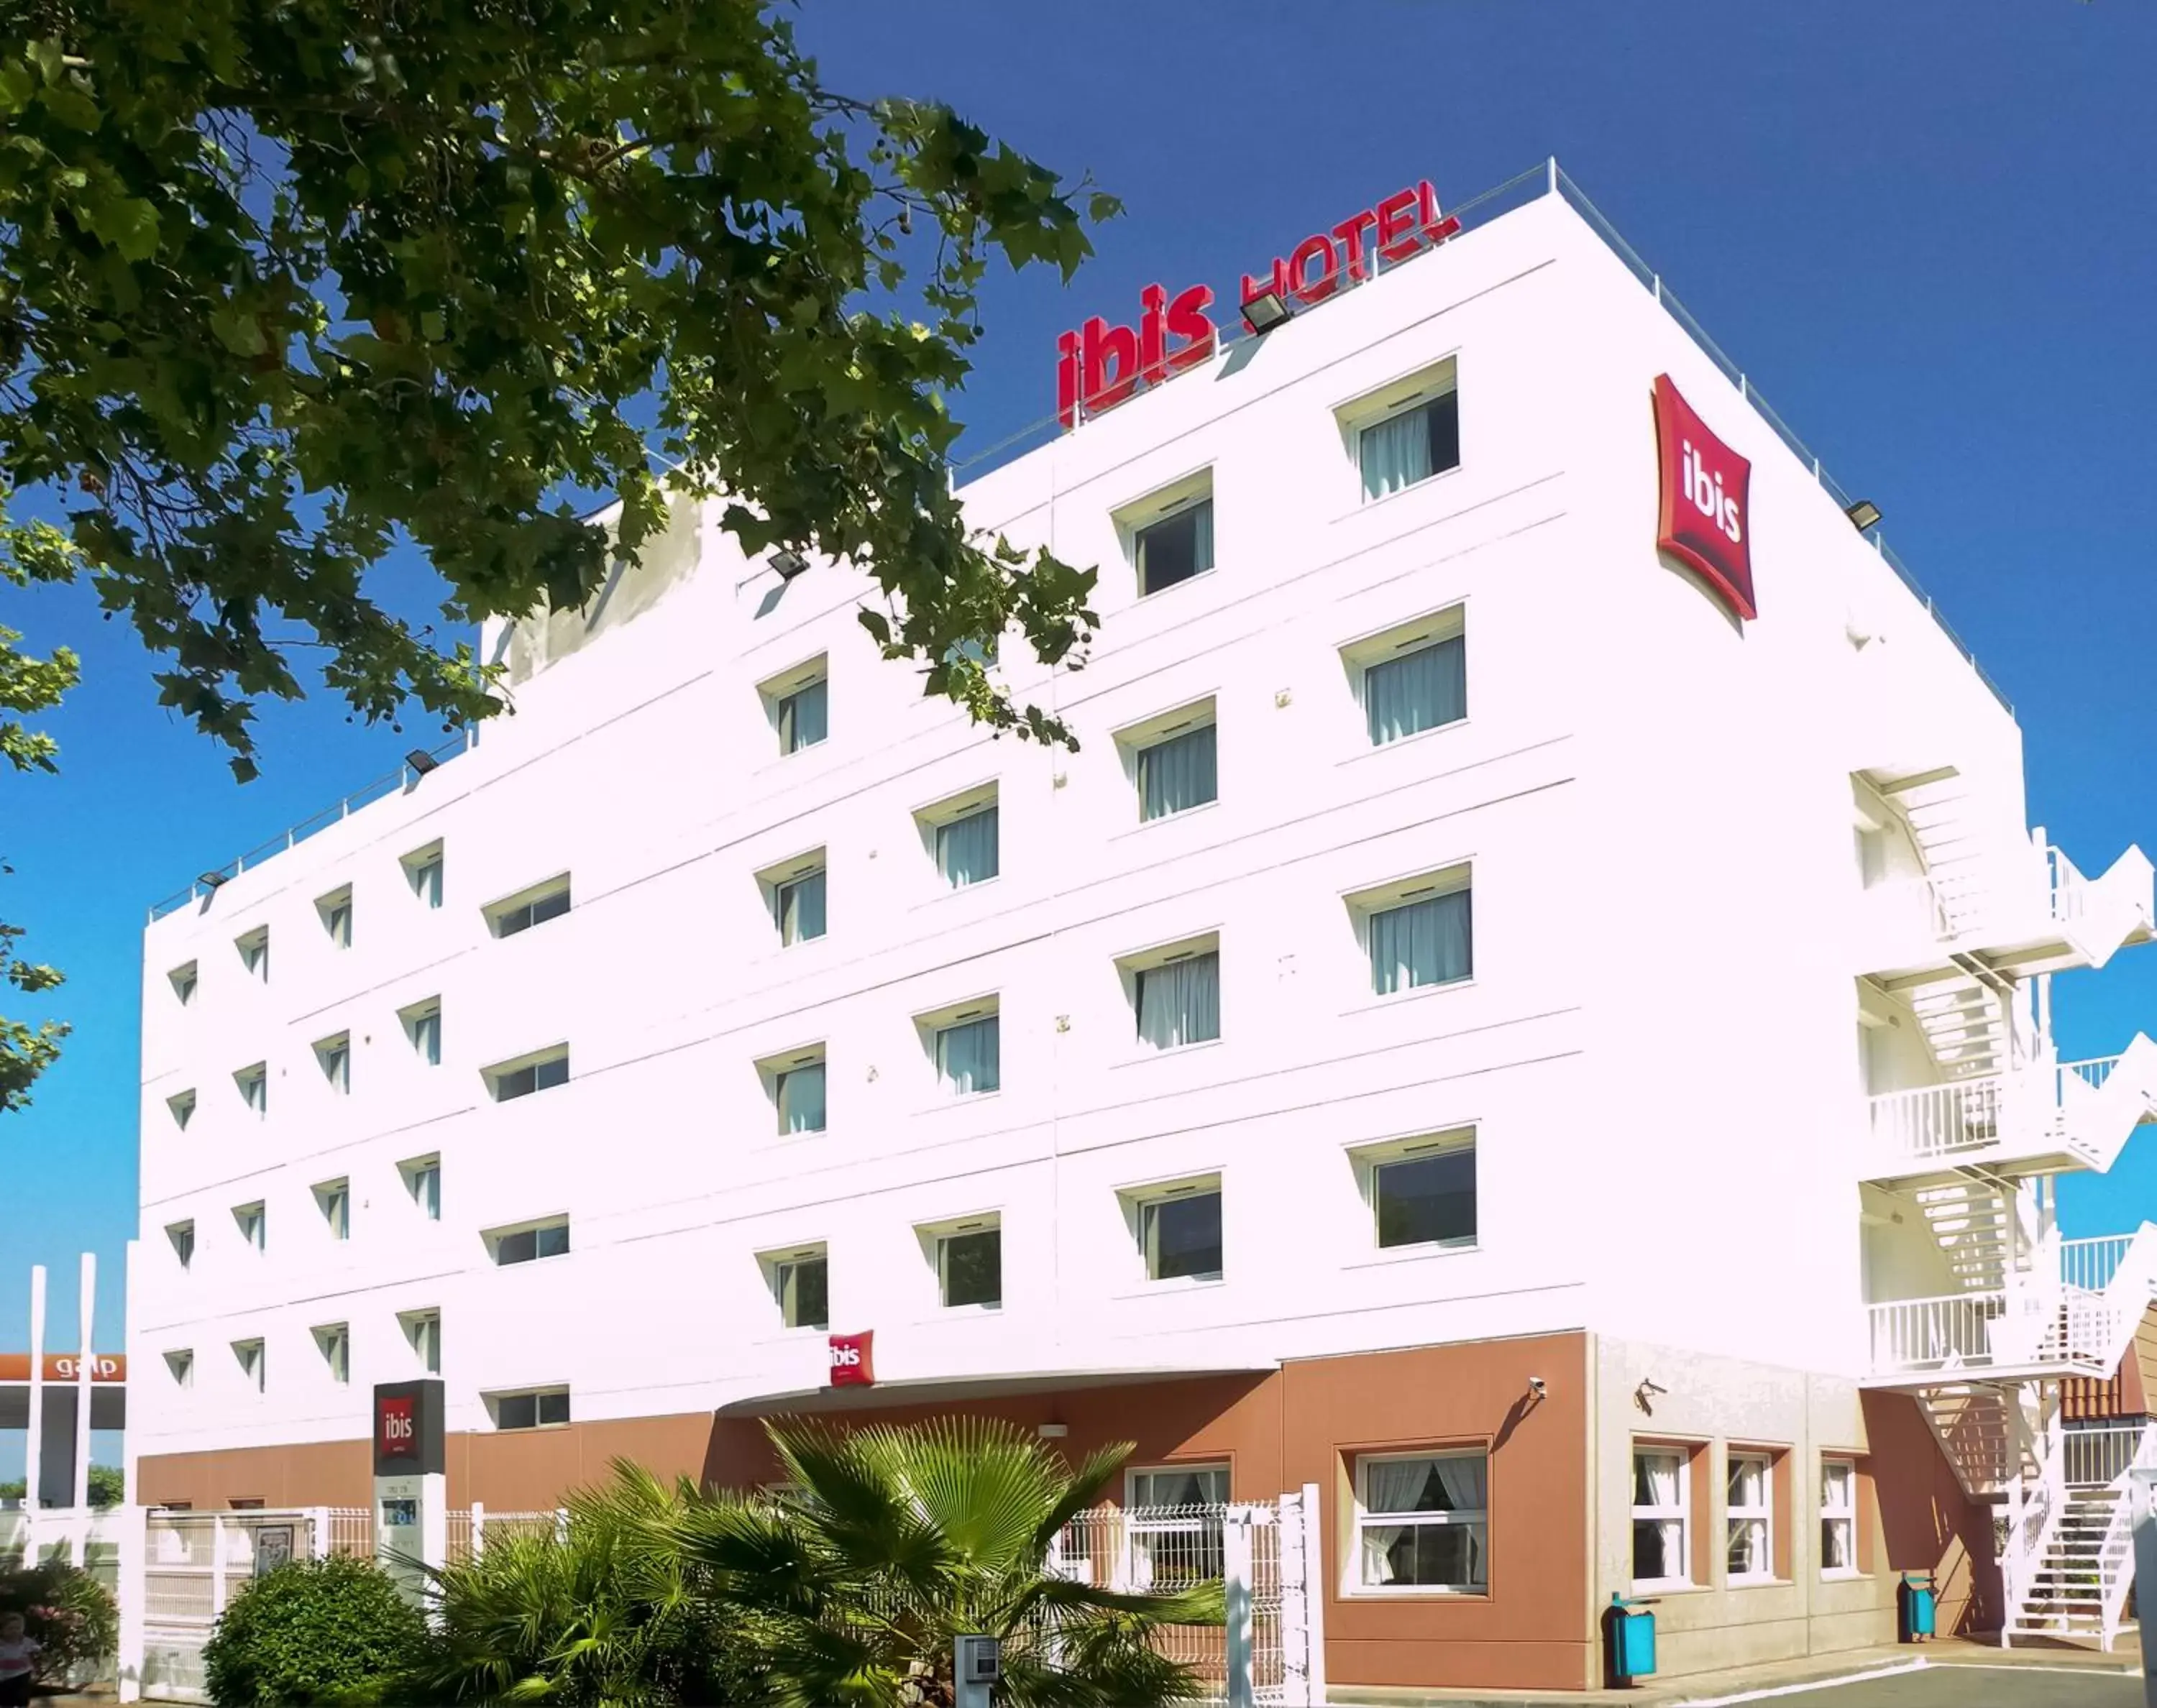 Property Building in Ibis Barcelona Castelldefels